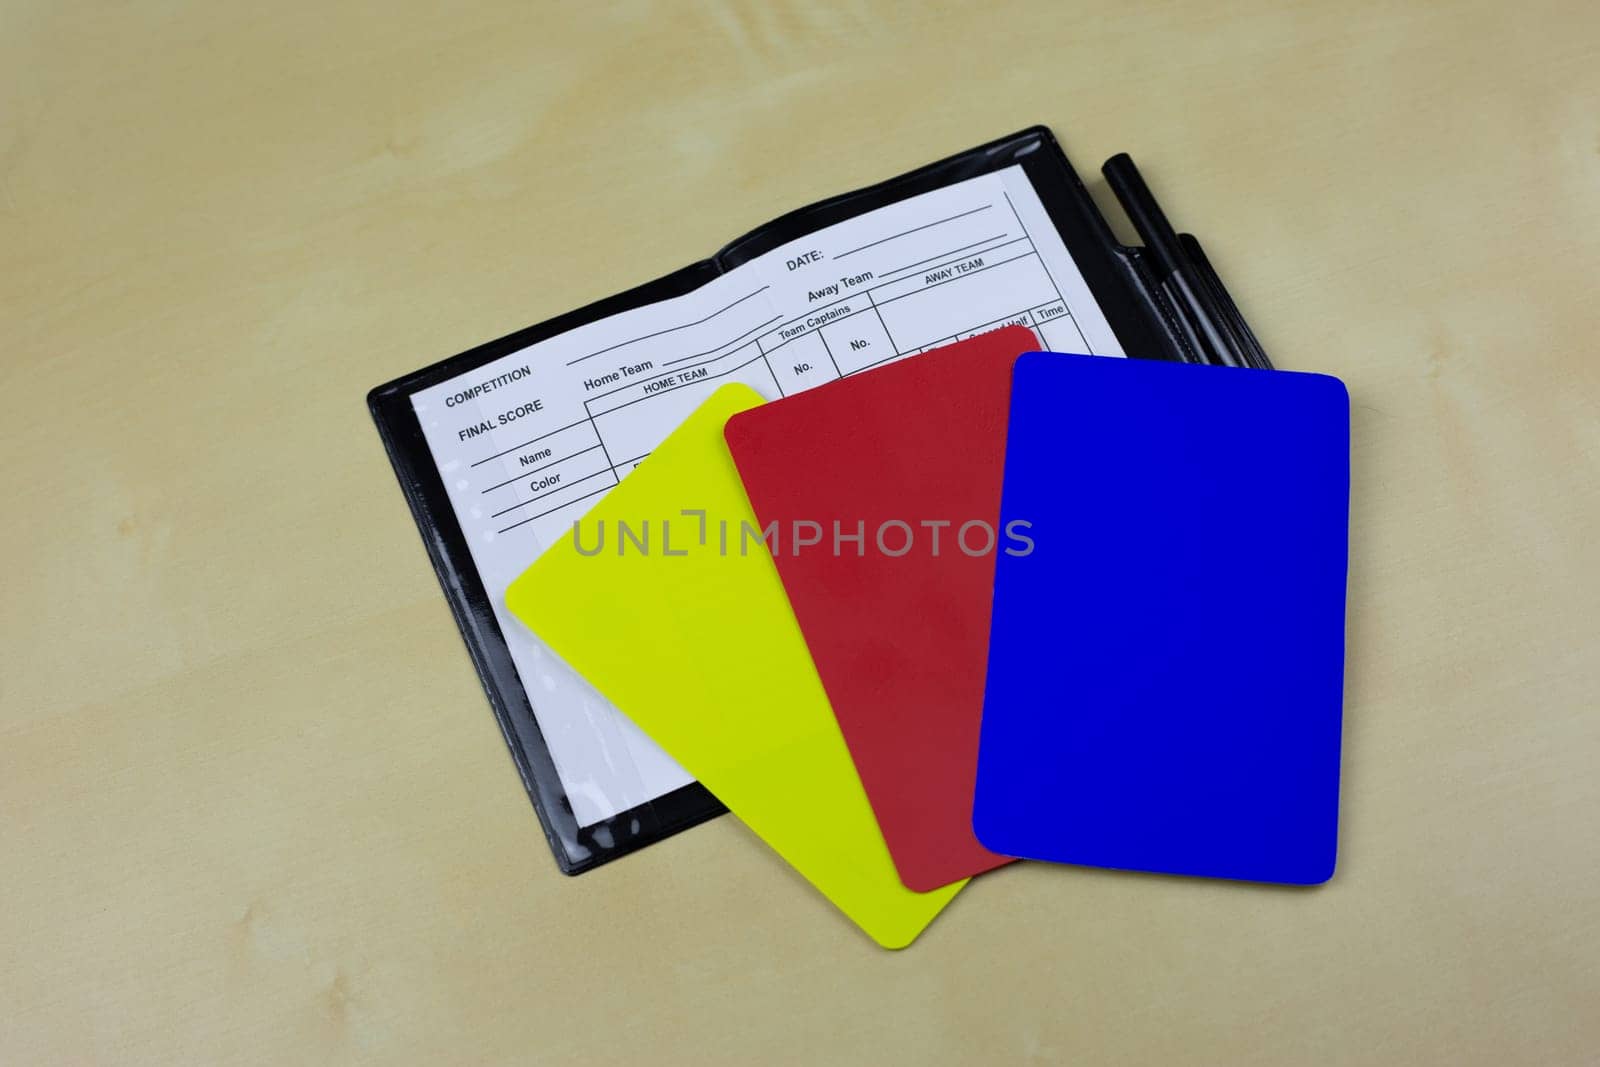 Football referee cards with new blue card lie in an open notebook to indicate player substitutions, changes in regulations